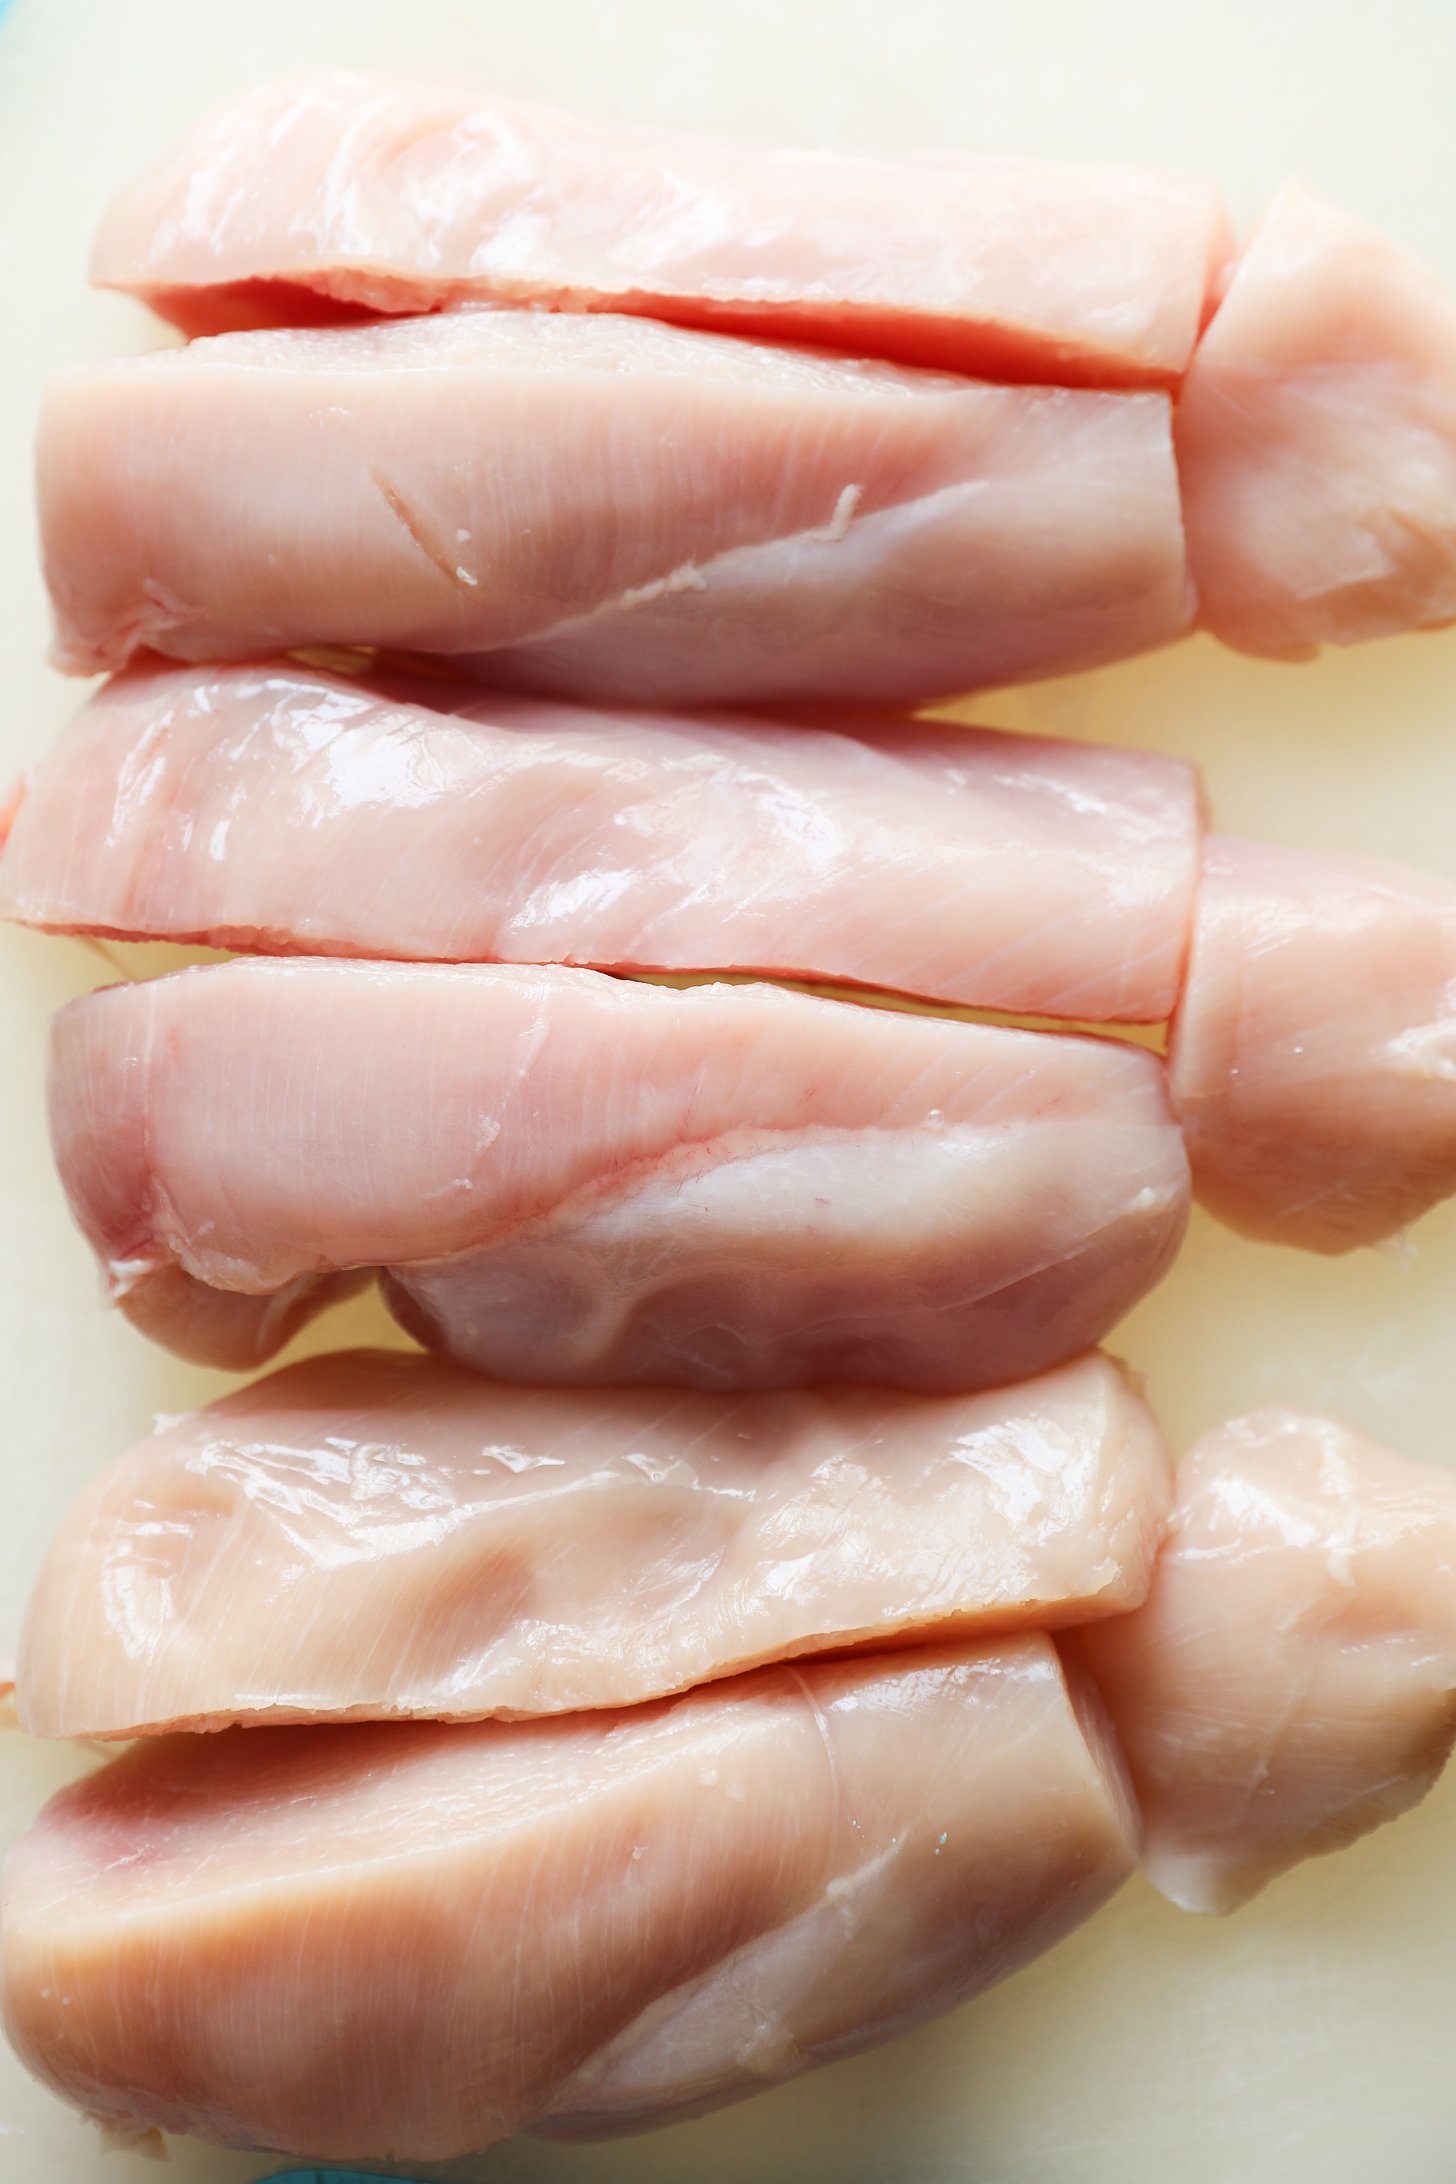 Close up image of chicken breast fillets slit in half with the ends cut off.